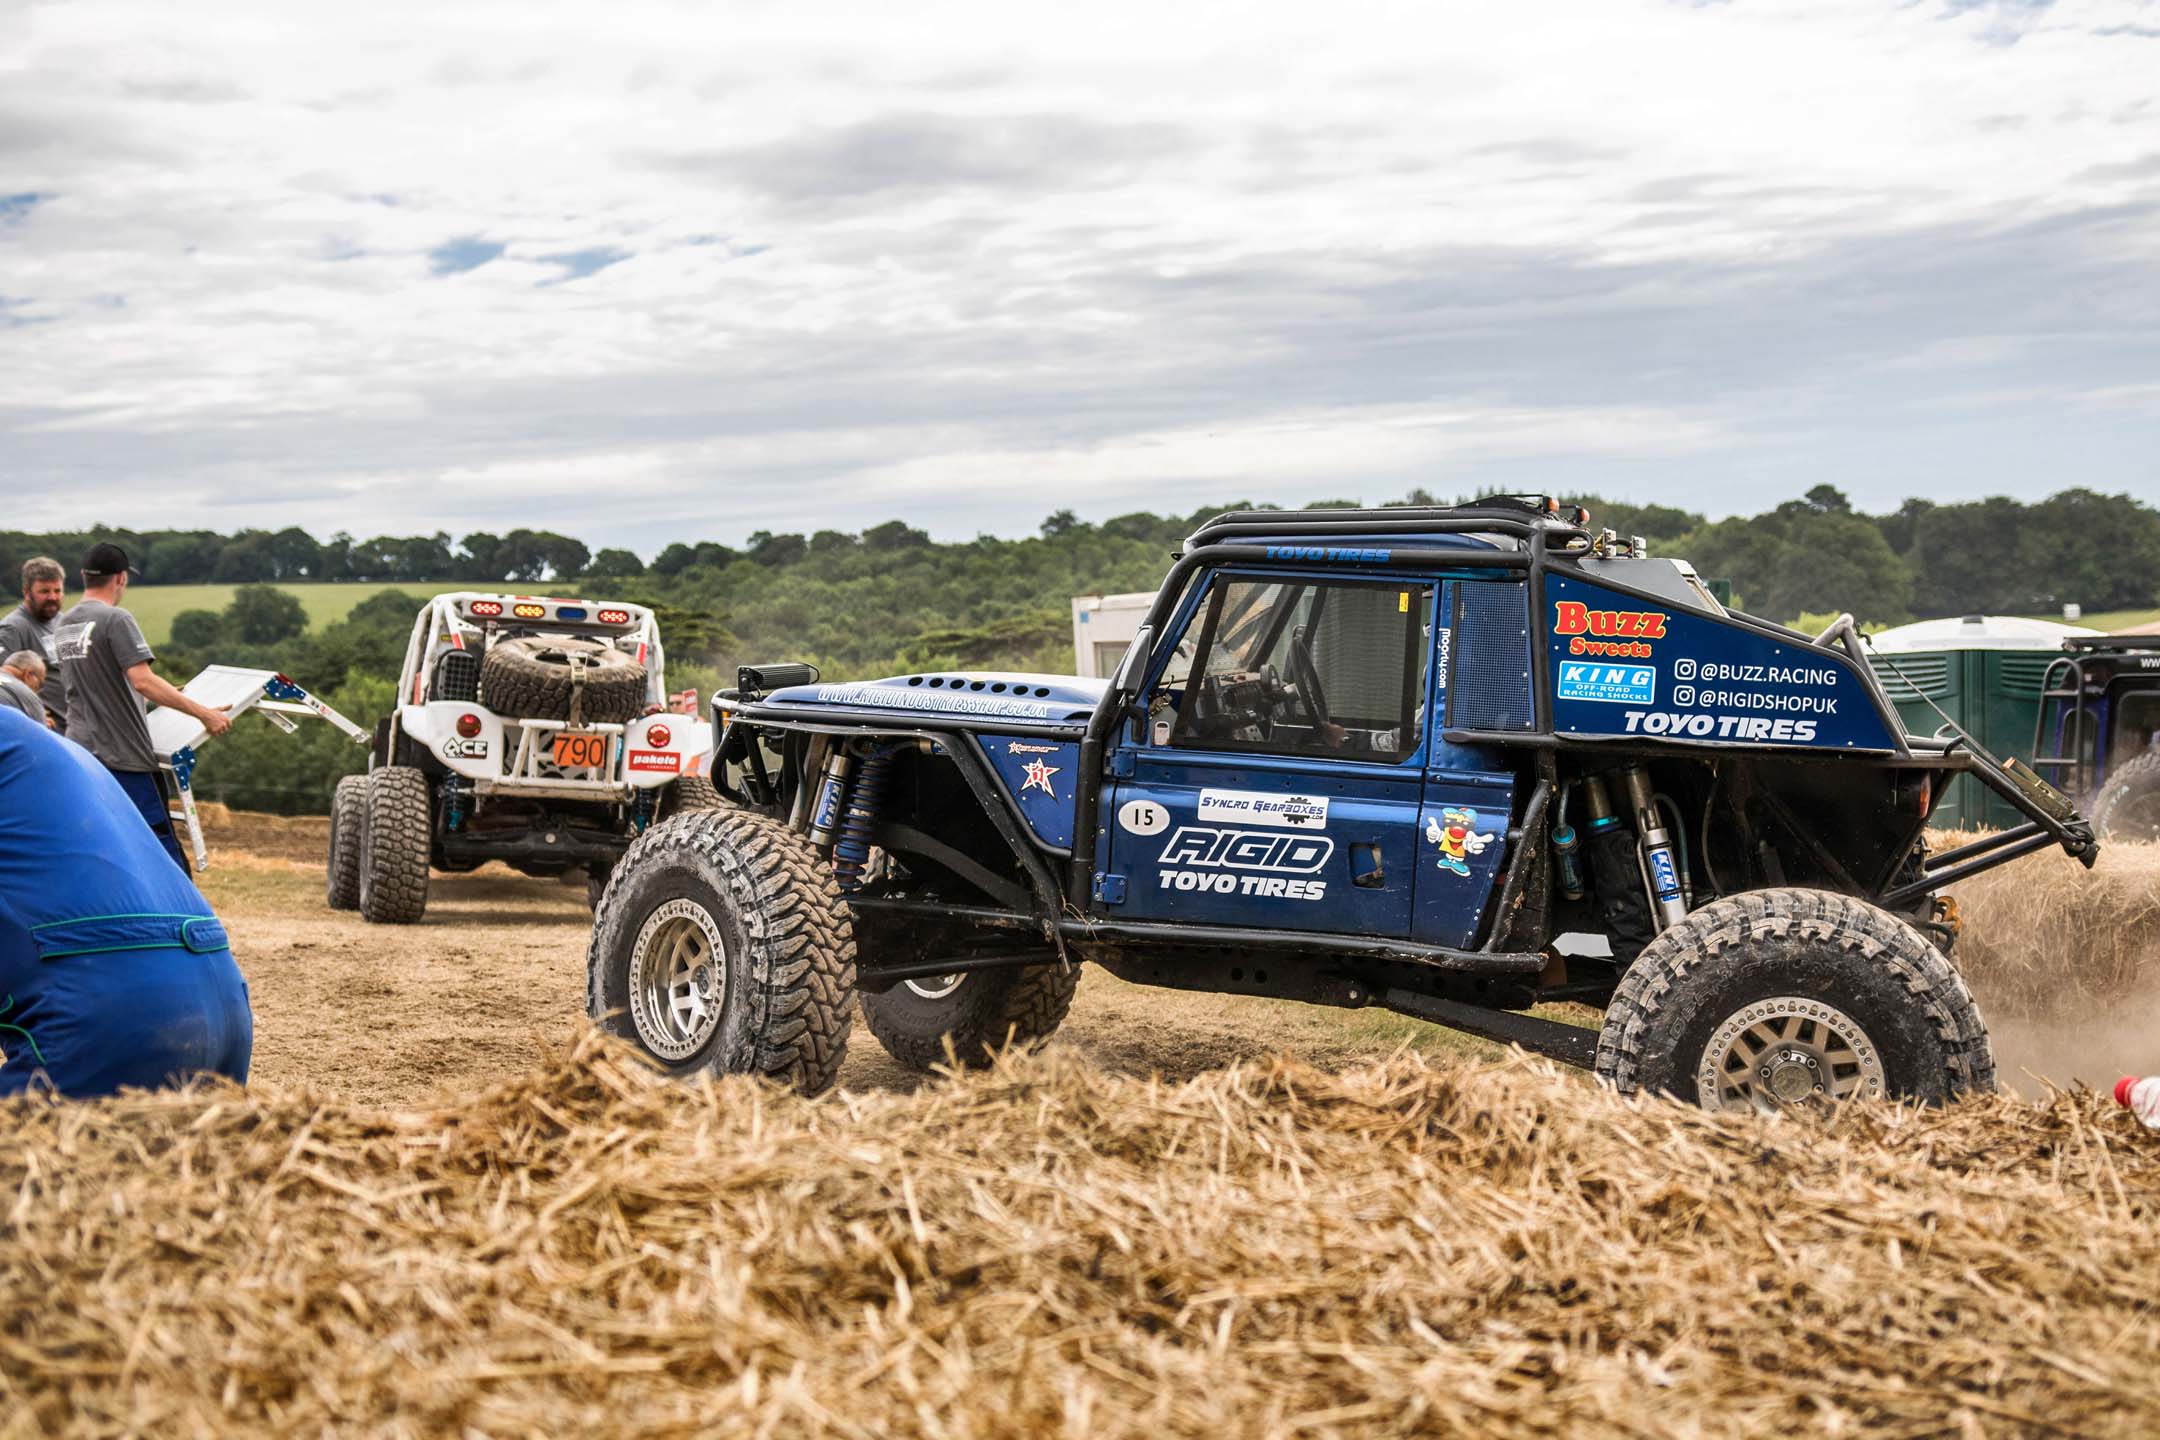 As Goodwood has expanded, the course has grown from just the tarmac climb to off-road and rally sections. Here, heavily modified machines make ready to head out onto the ruts and jumps of the off-road course.